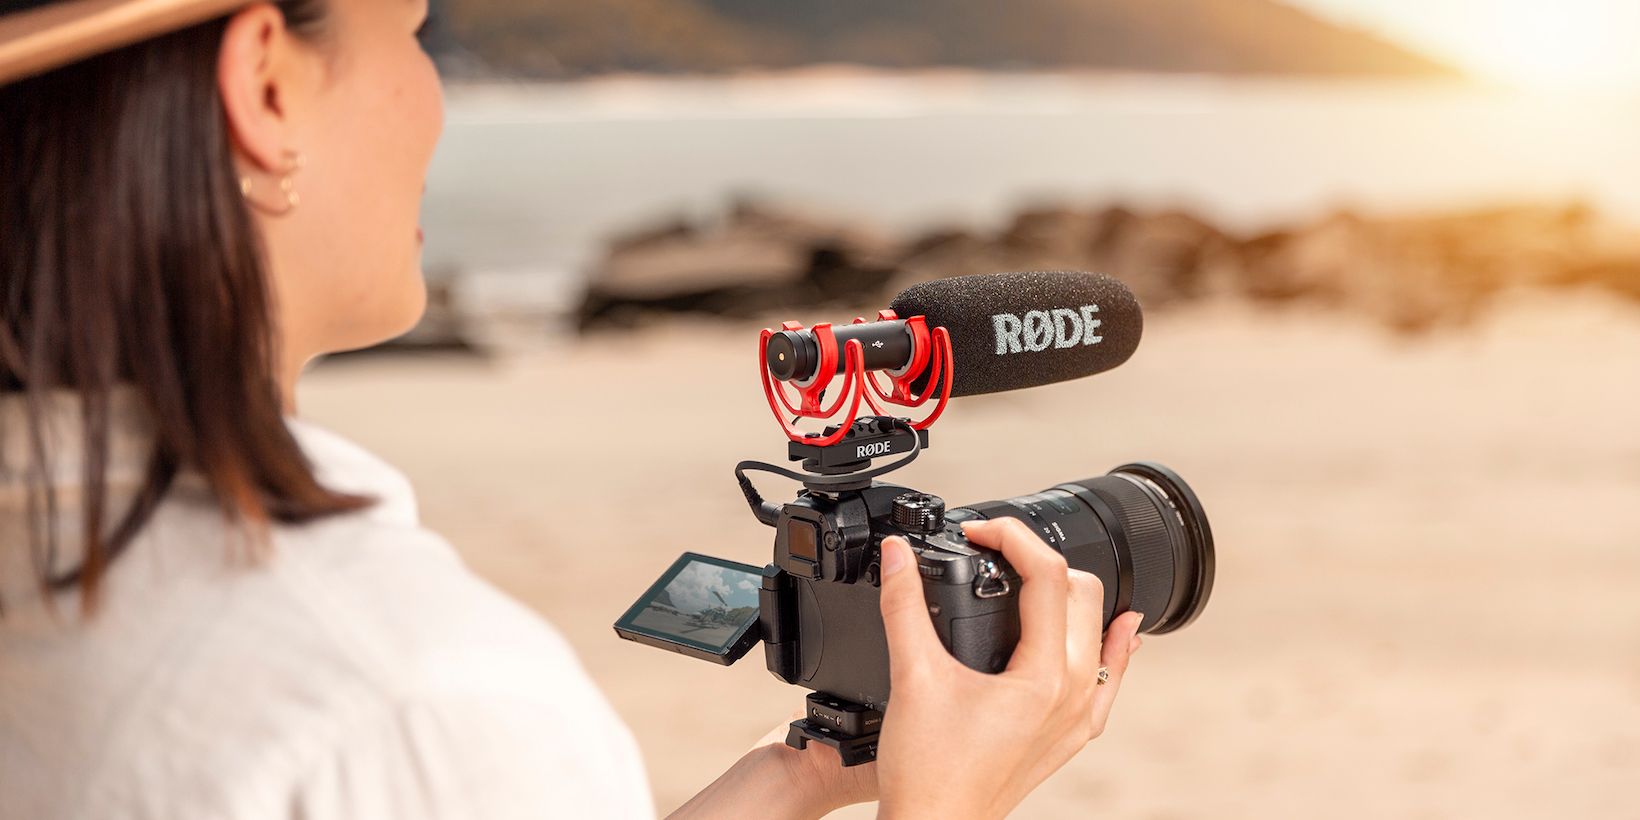 Rode VideoMic NTG attached to DSLR